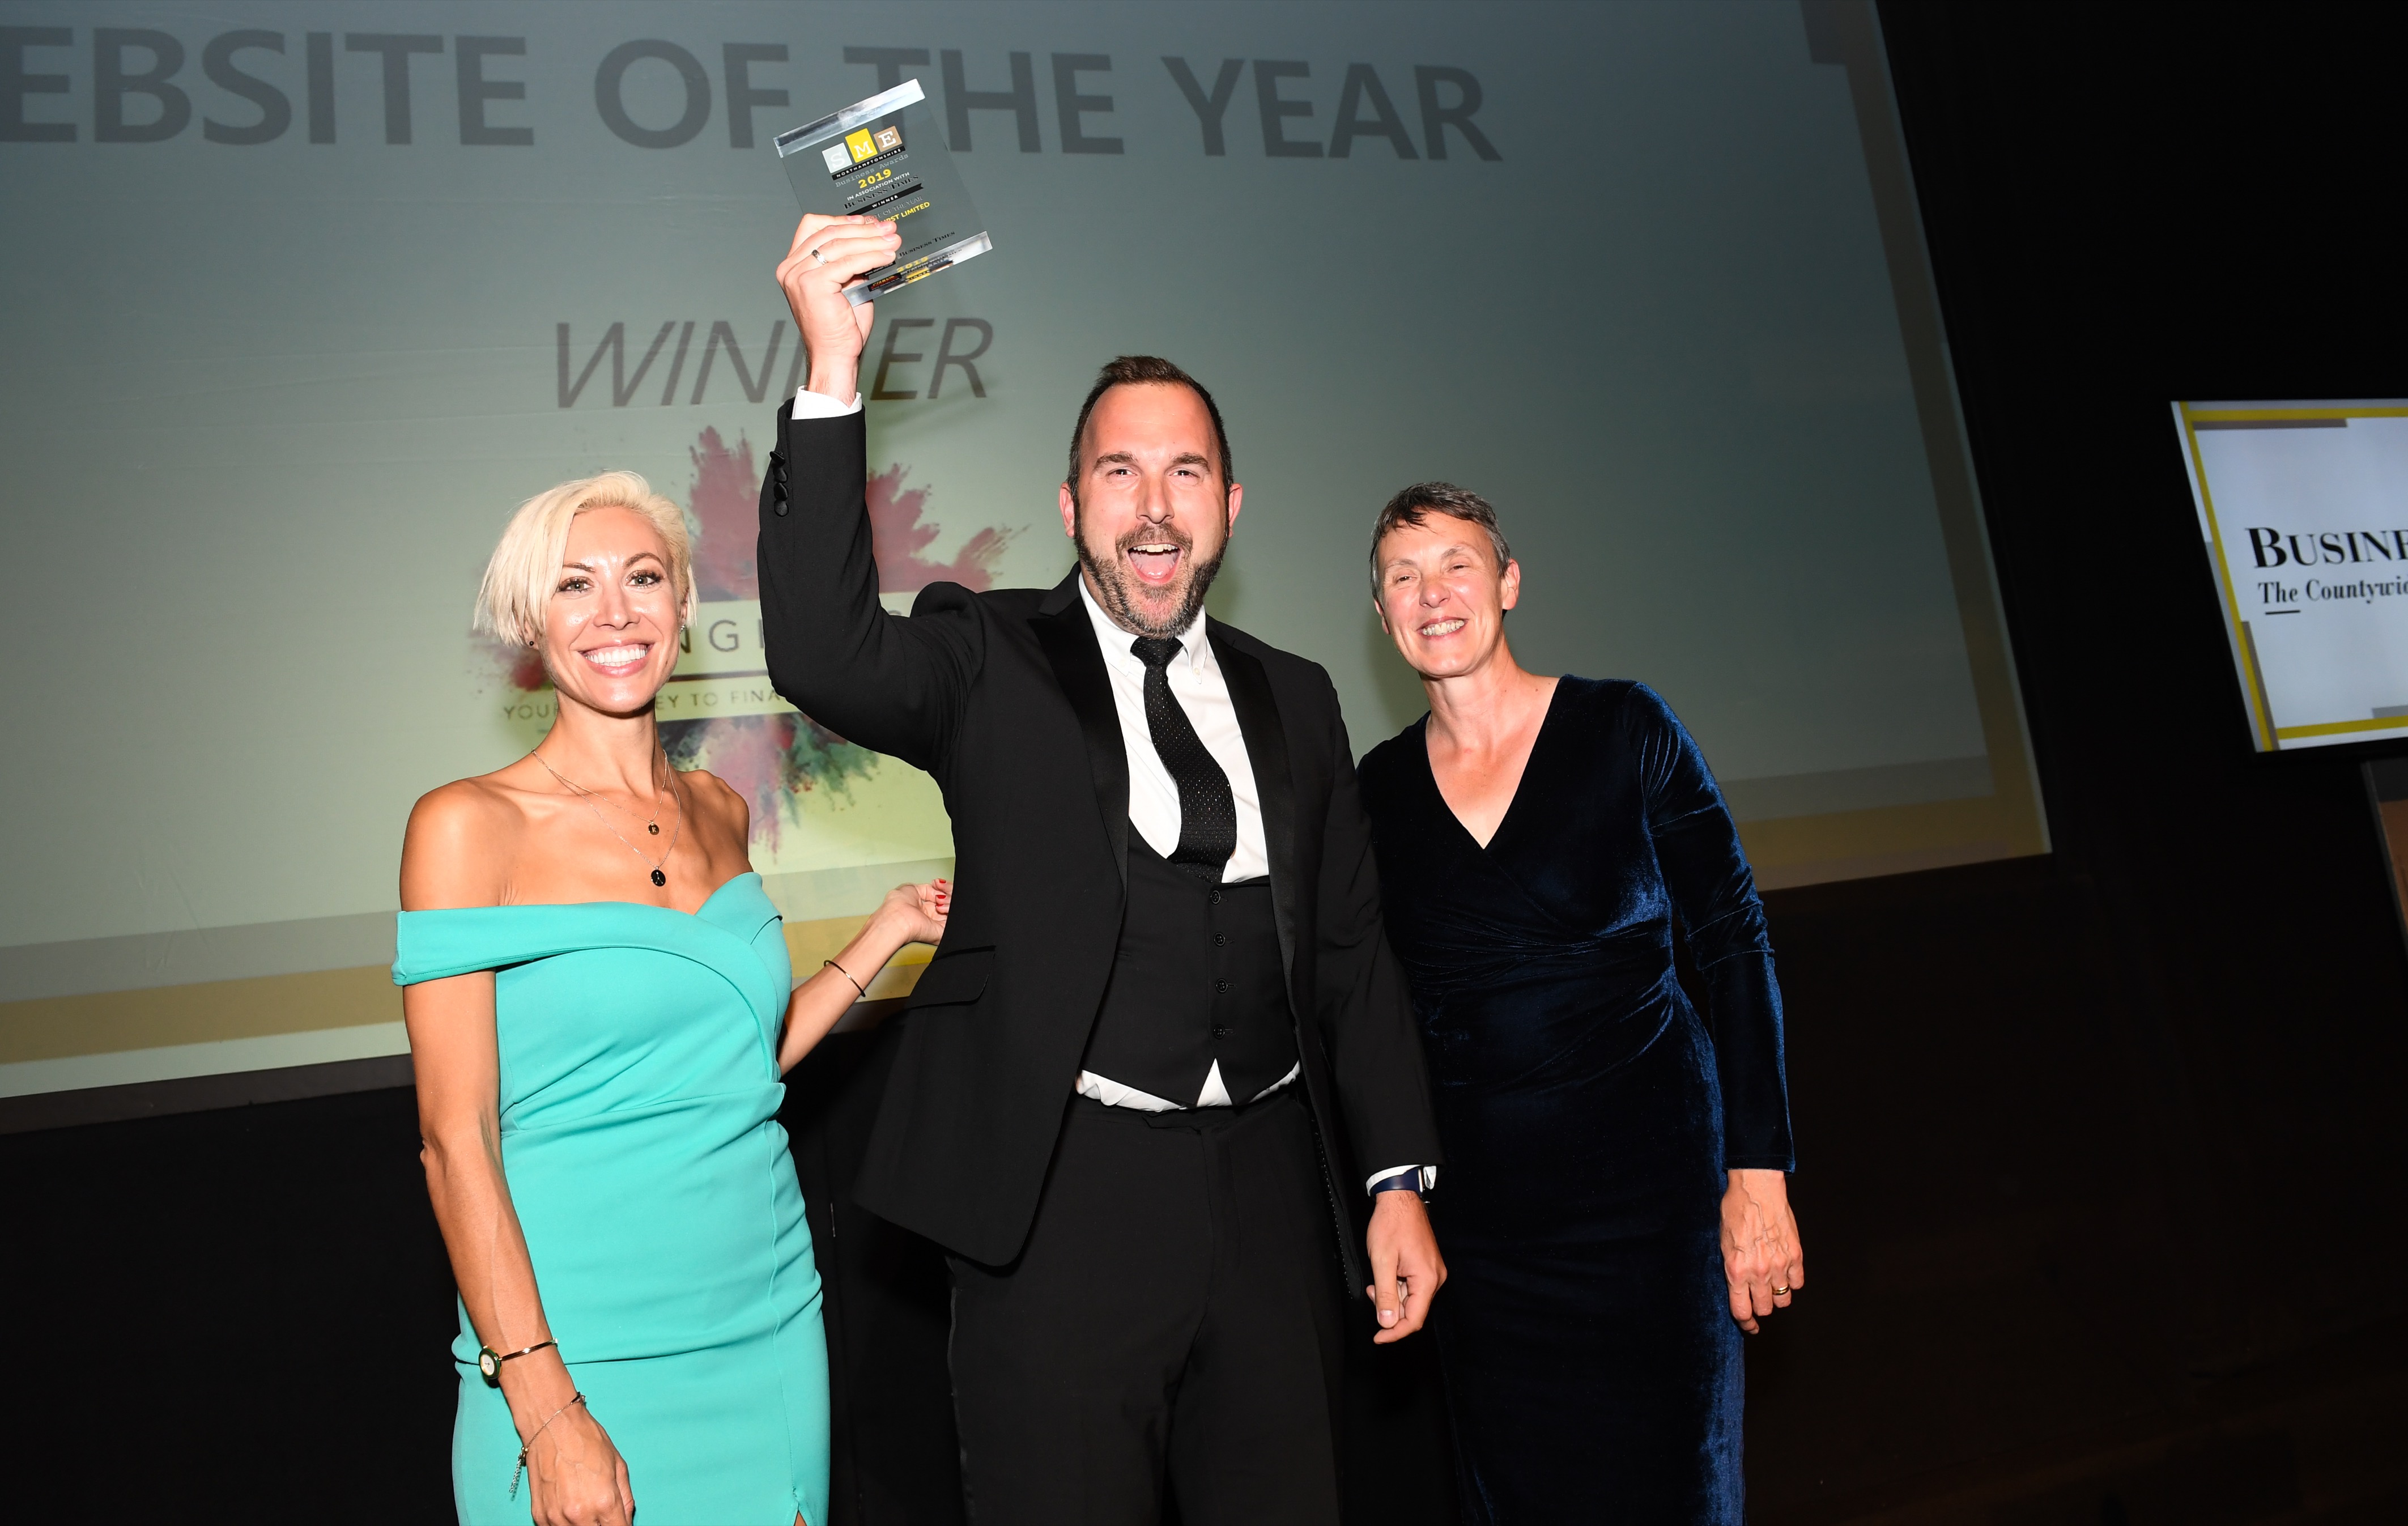 Longhurst - Website of the Year - SME South Northamptonshire Awards